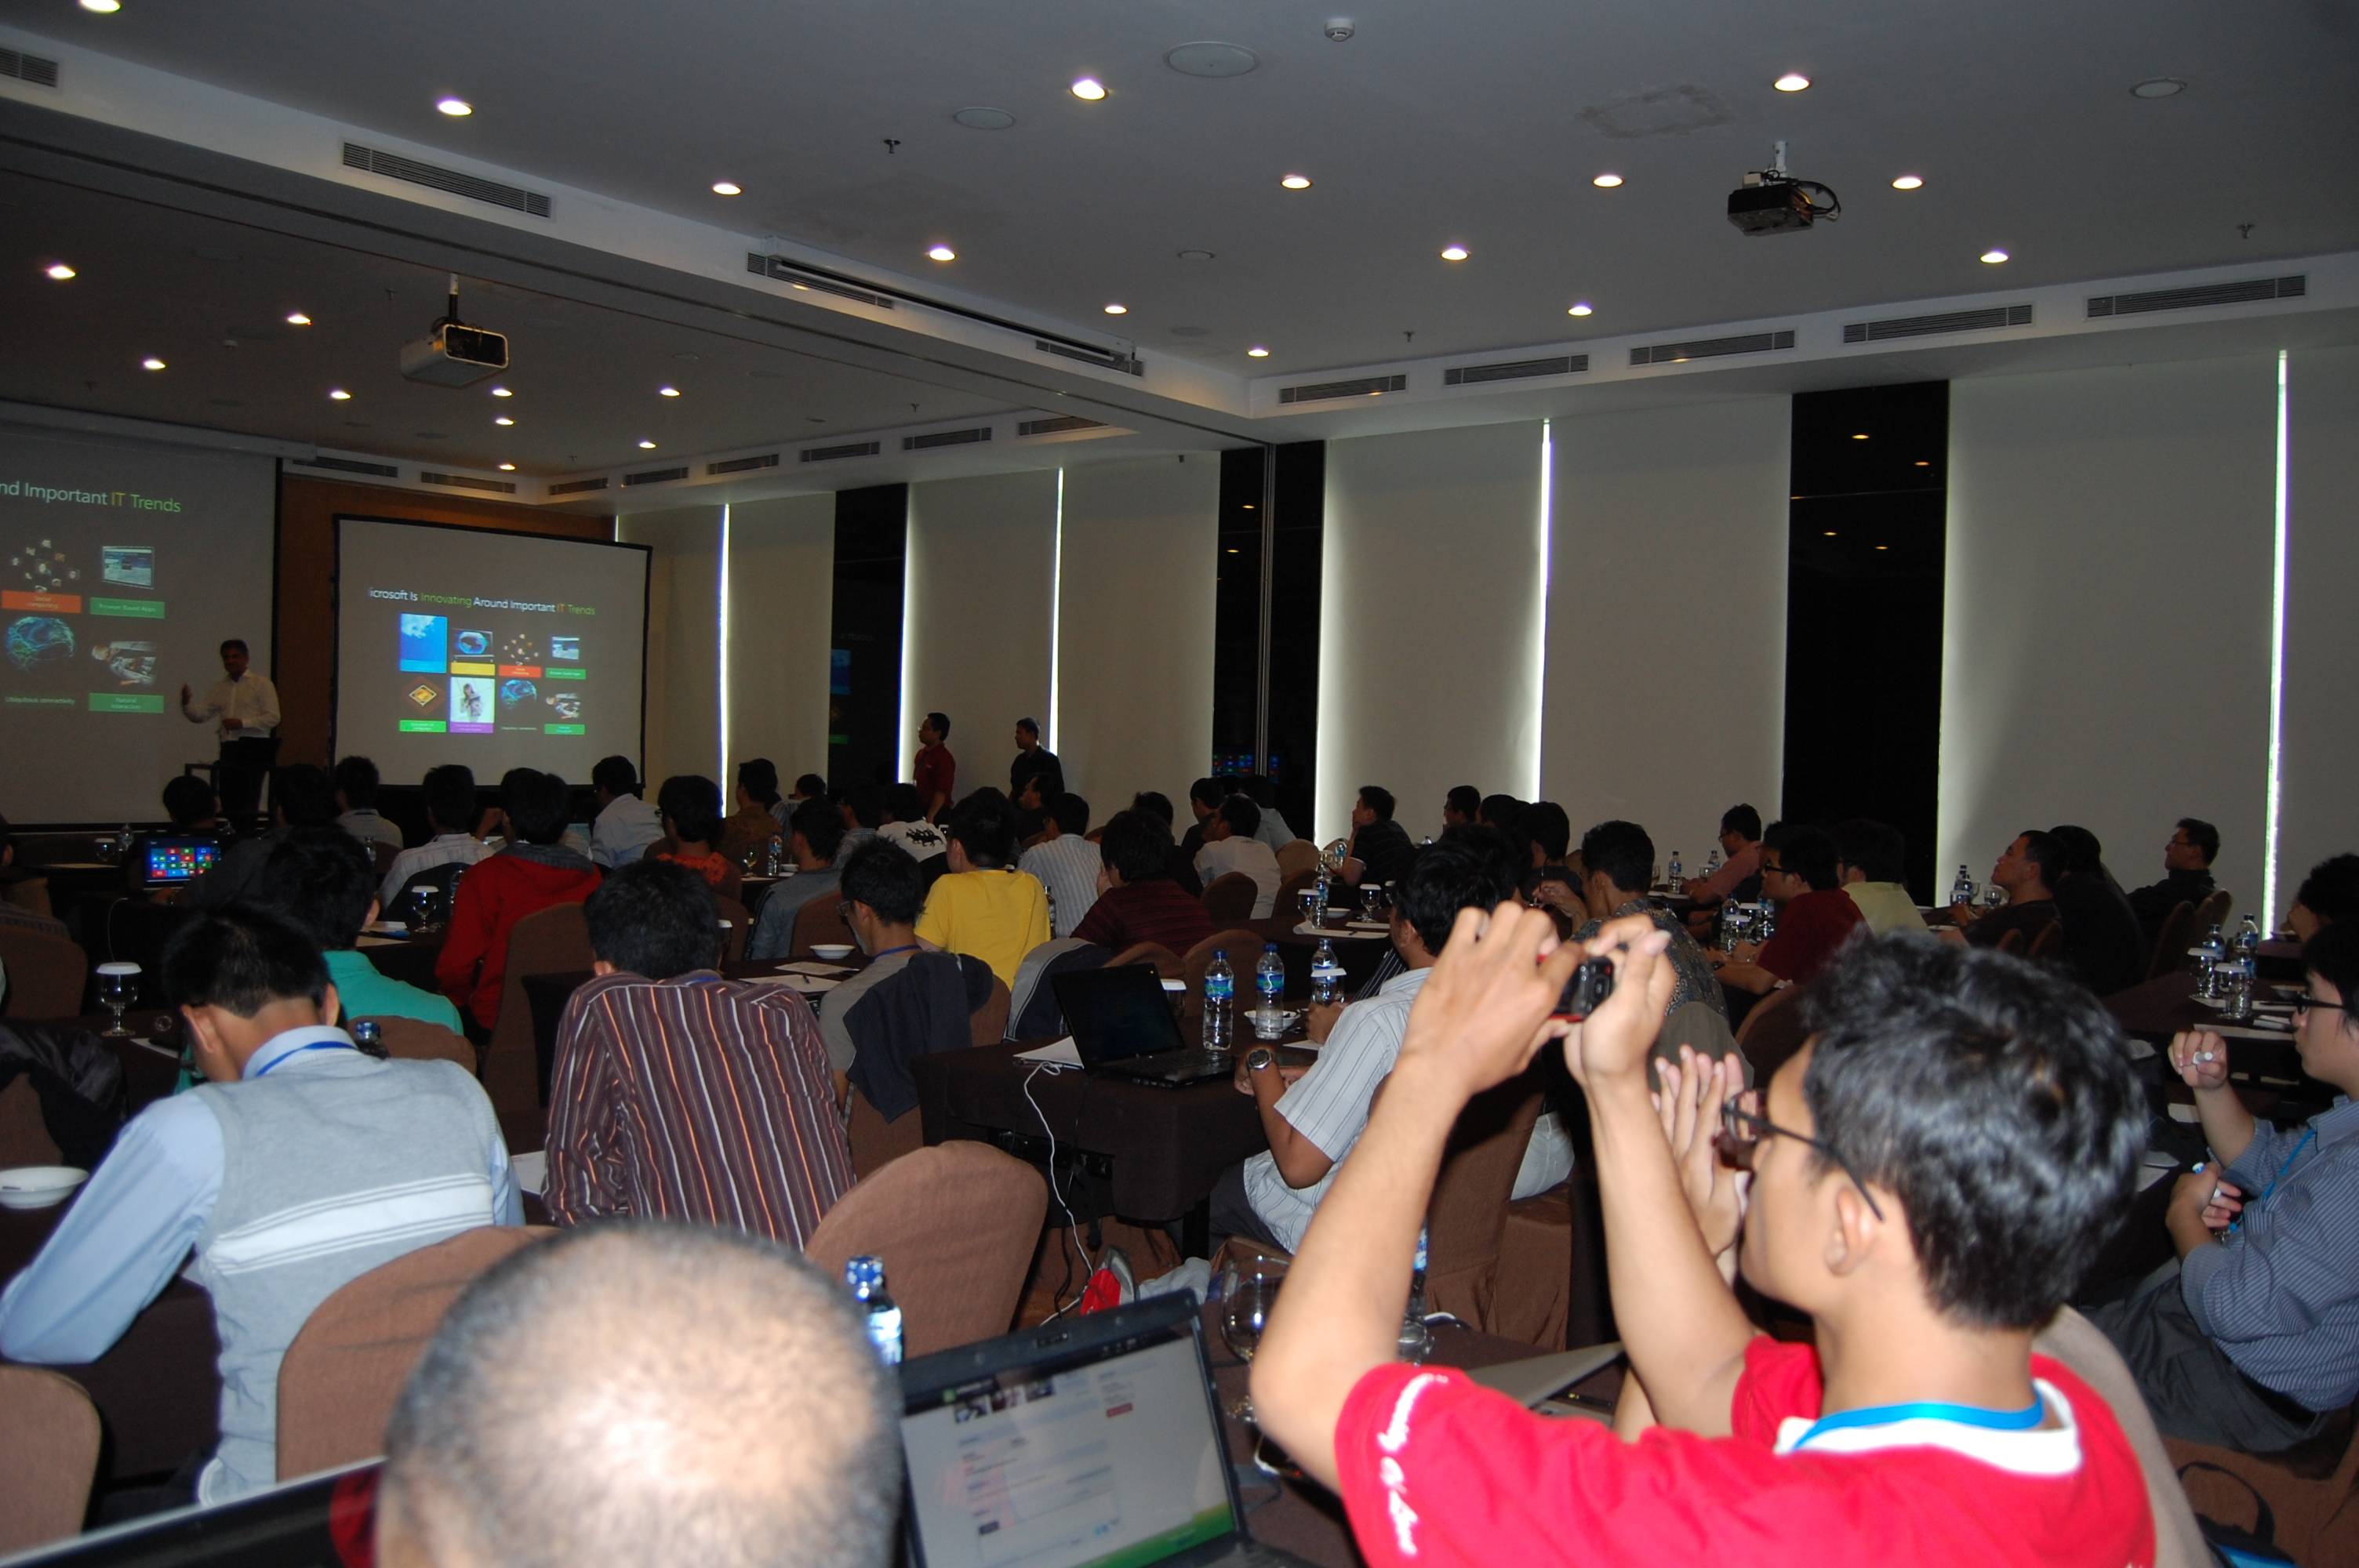 Windows 8 Boot Camp Held In Indonesia Produces Dozens Of Applications